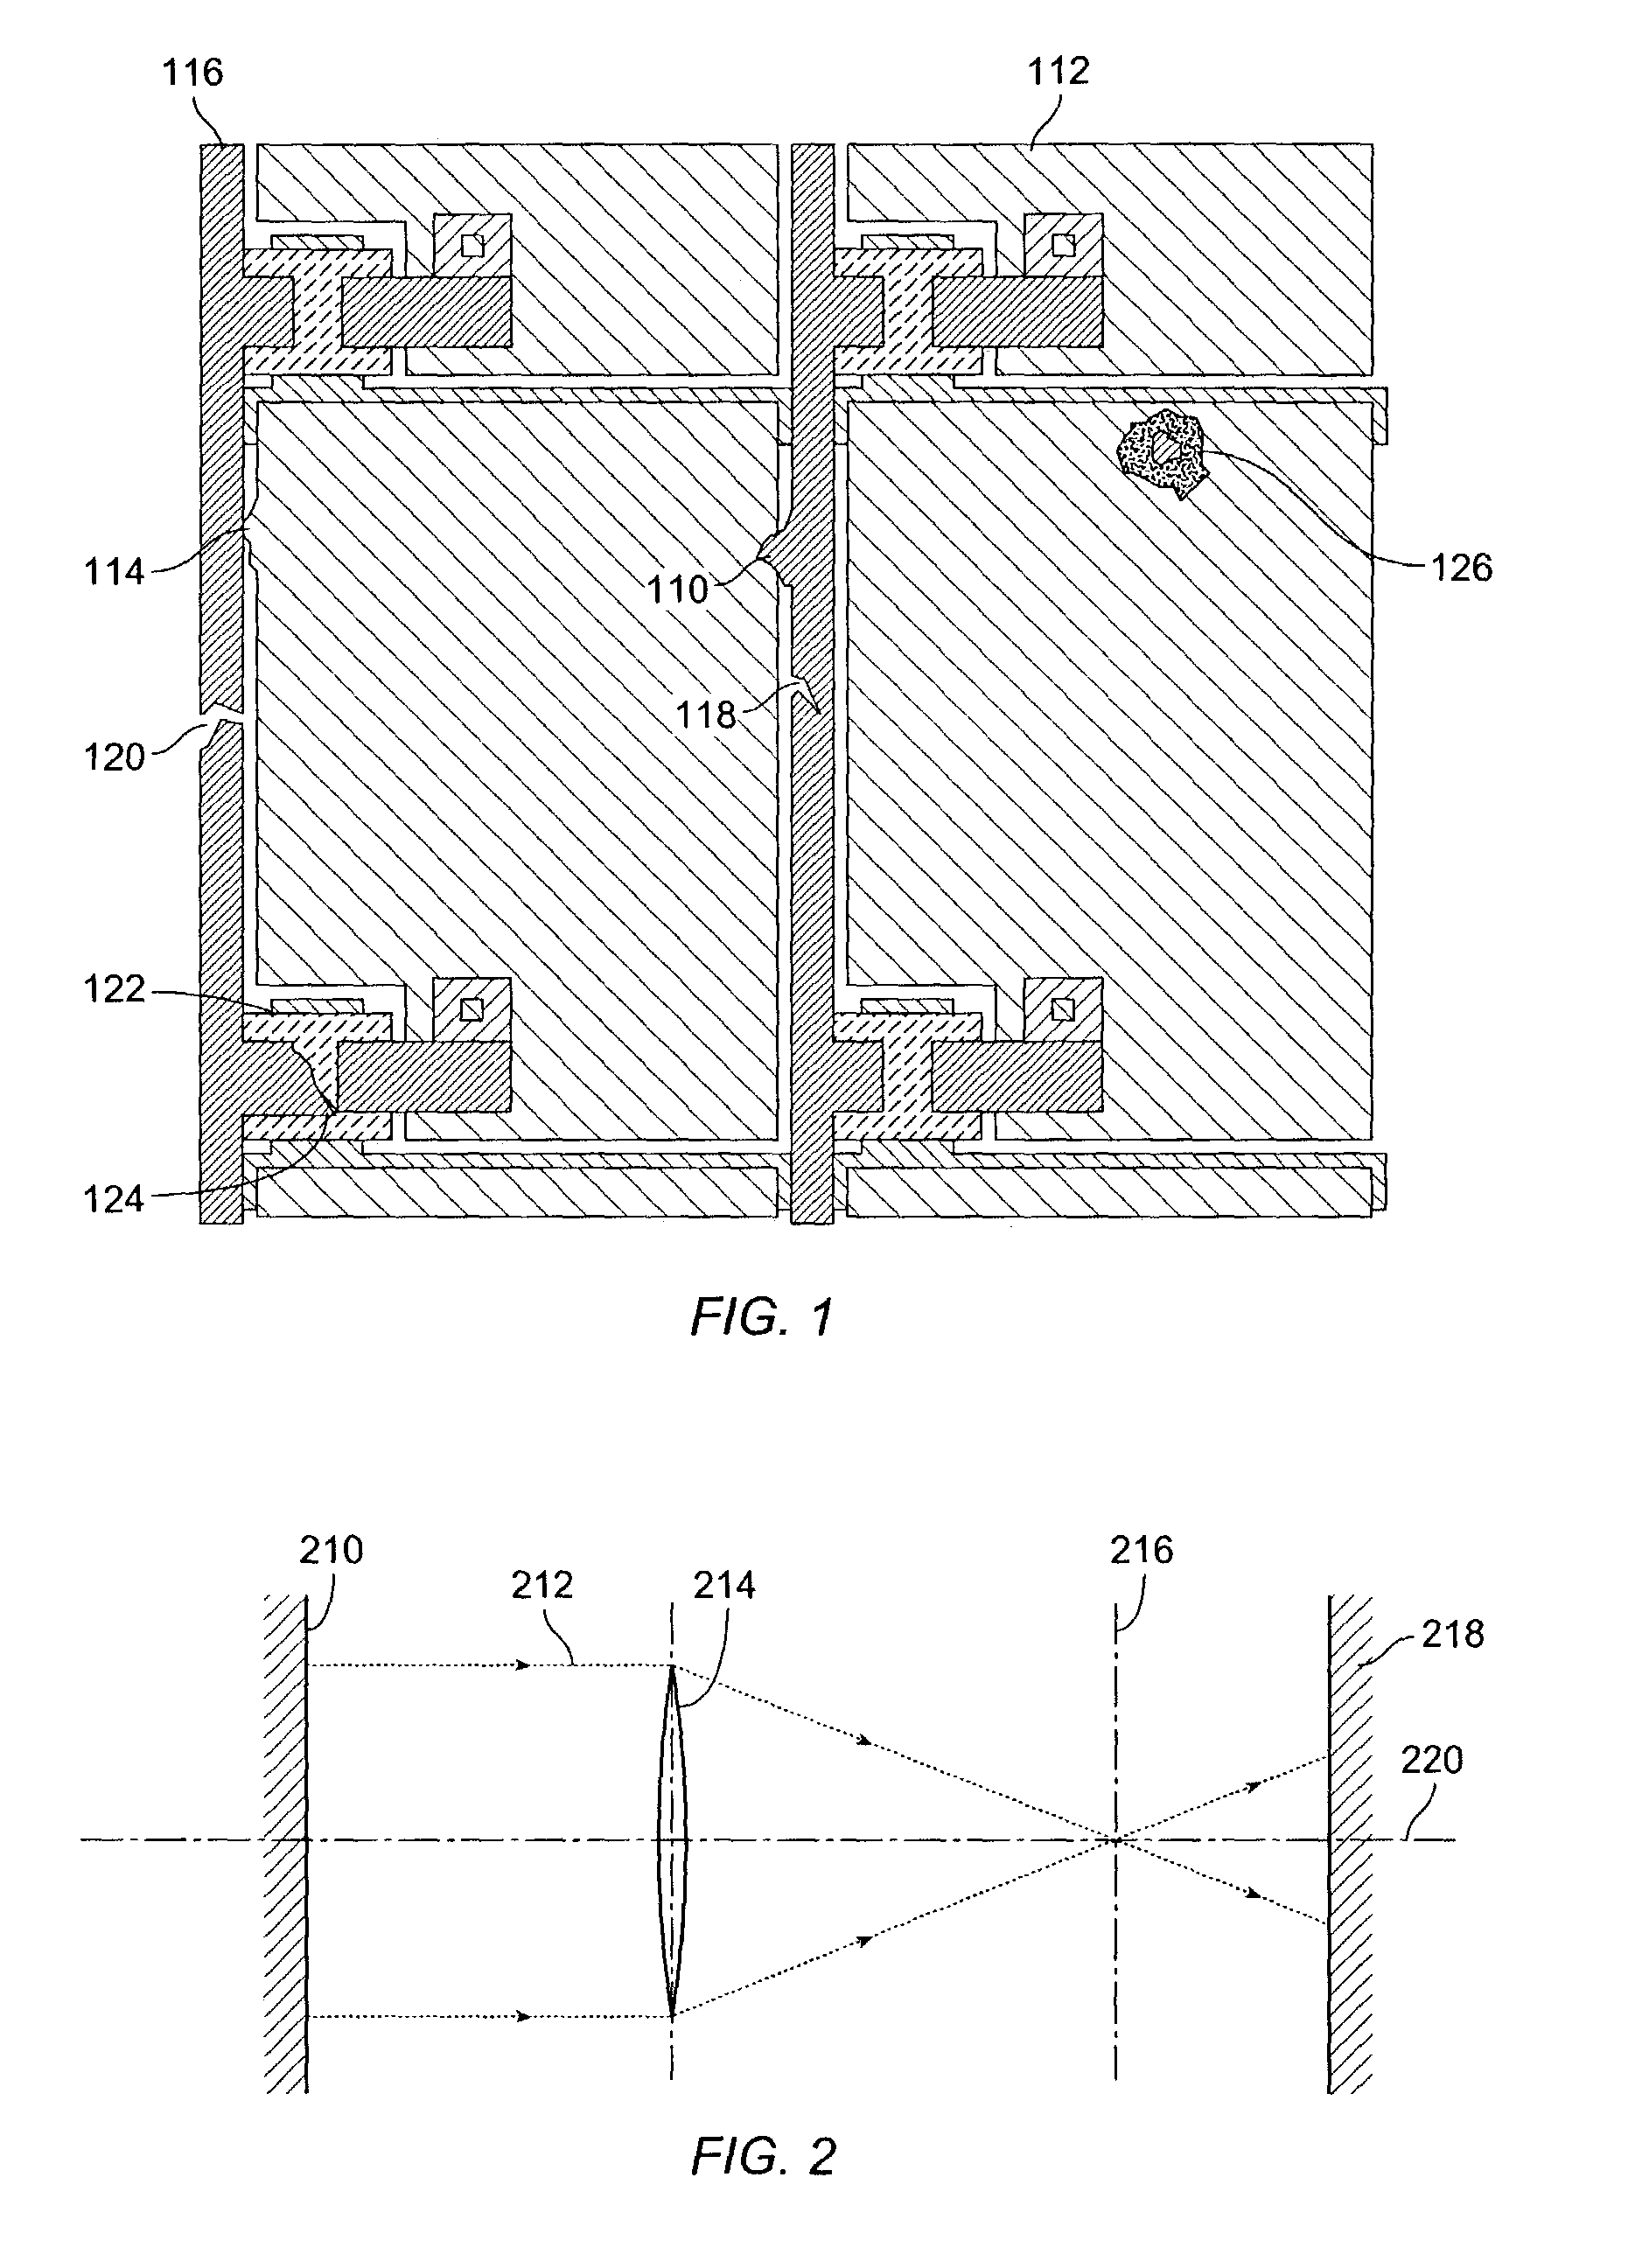 Method and apparatus for high-throughput inspection of large flat patterned media using dynamically programmable optical spatial filtering